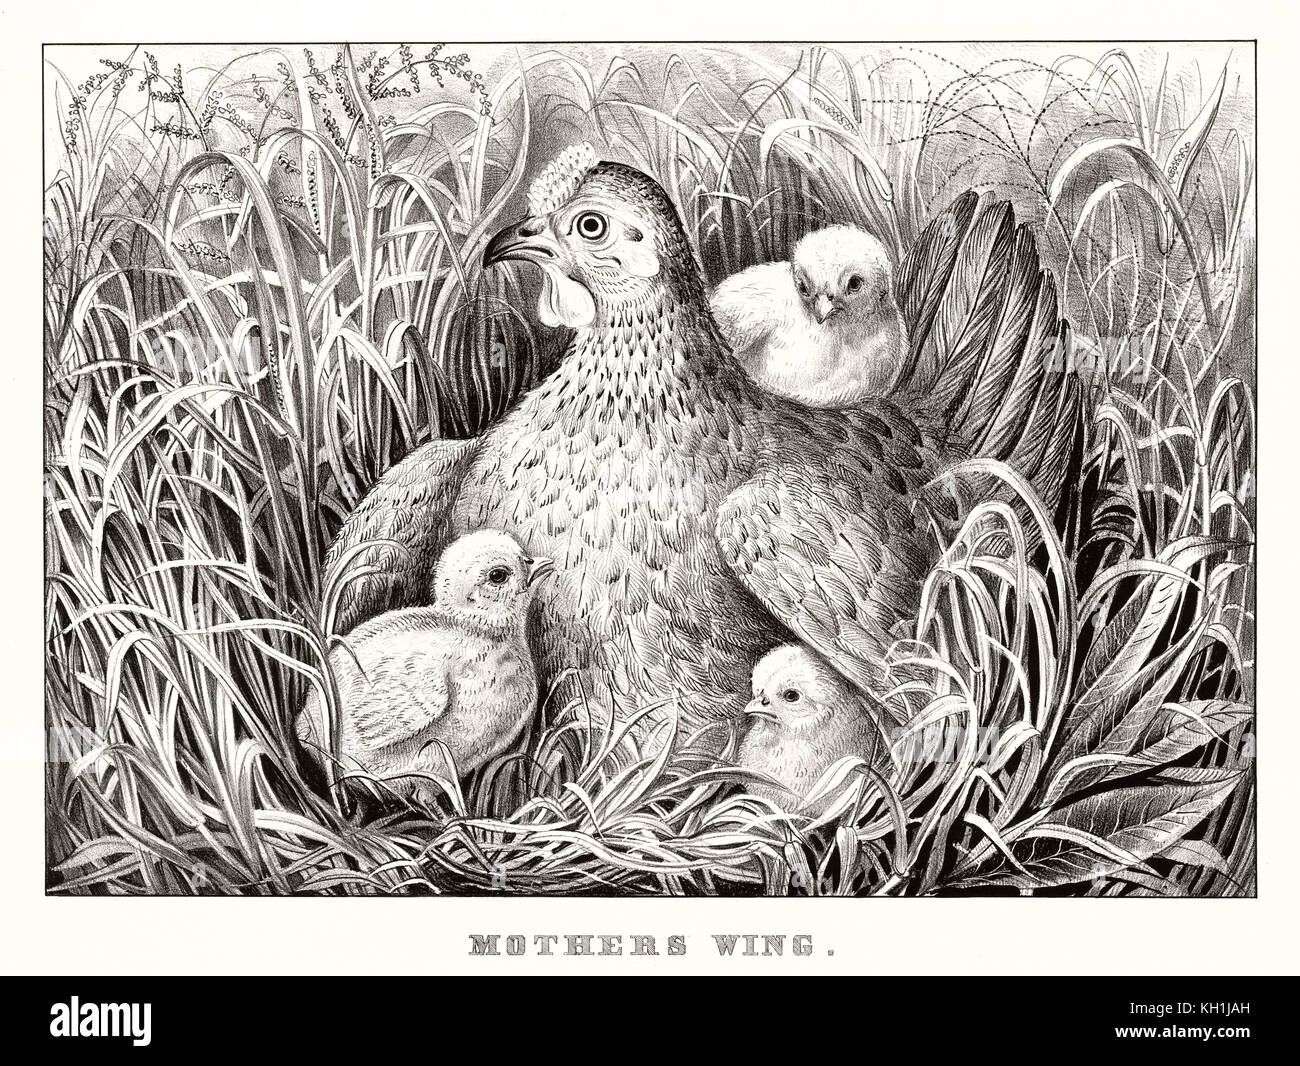 Old illustration of chicks protected under mother's wings. By Currier & Ives, publ. in New York, 1866 Stock Photo